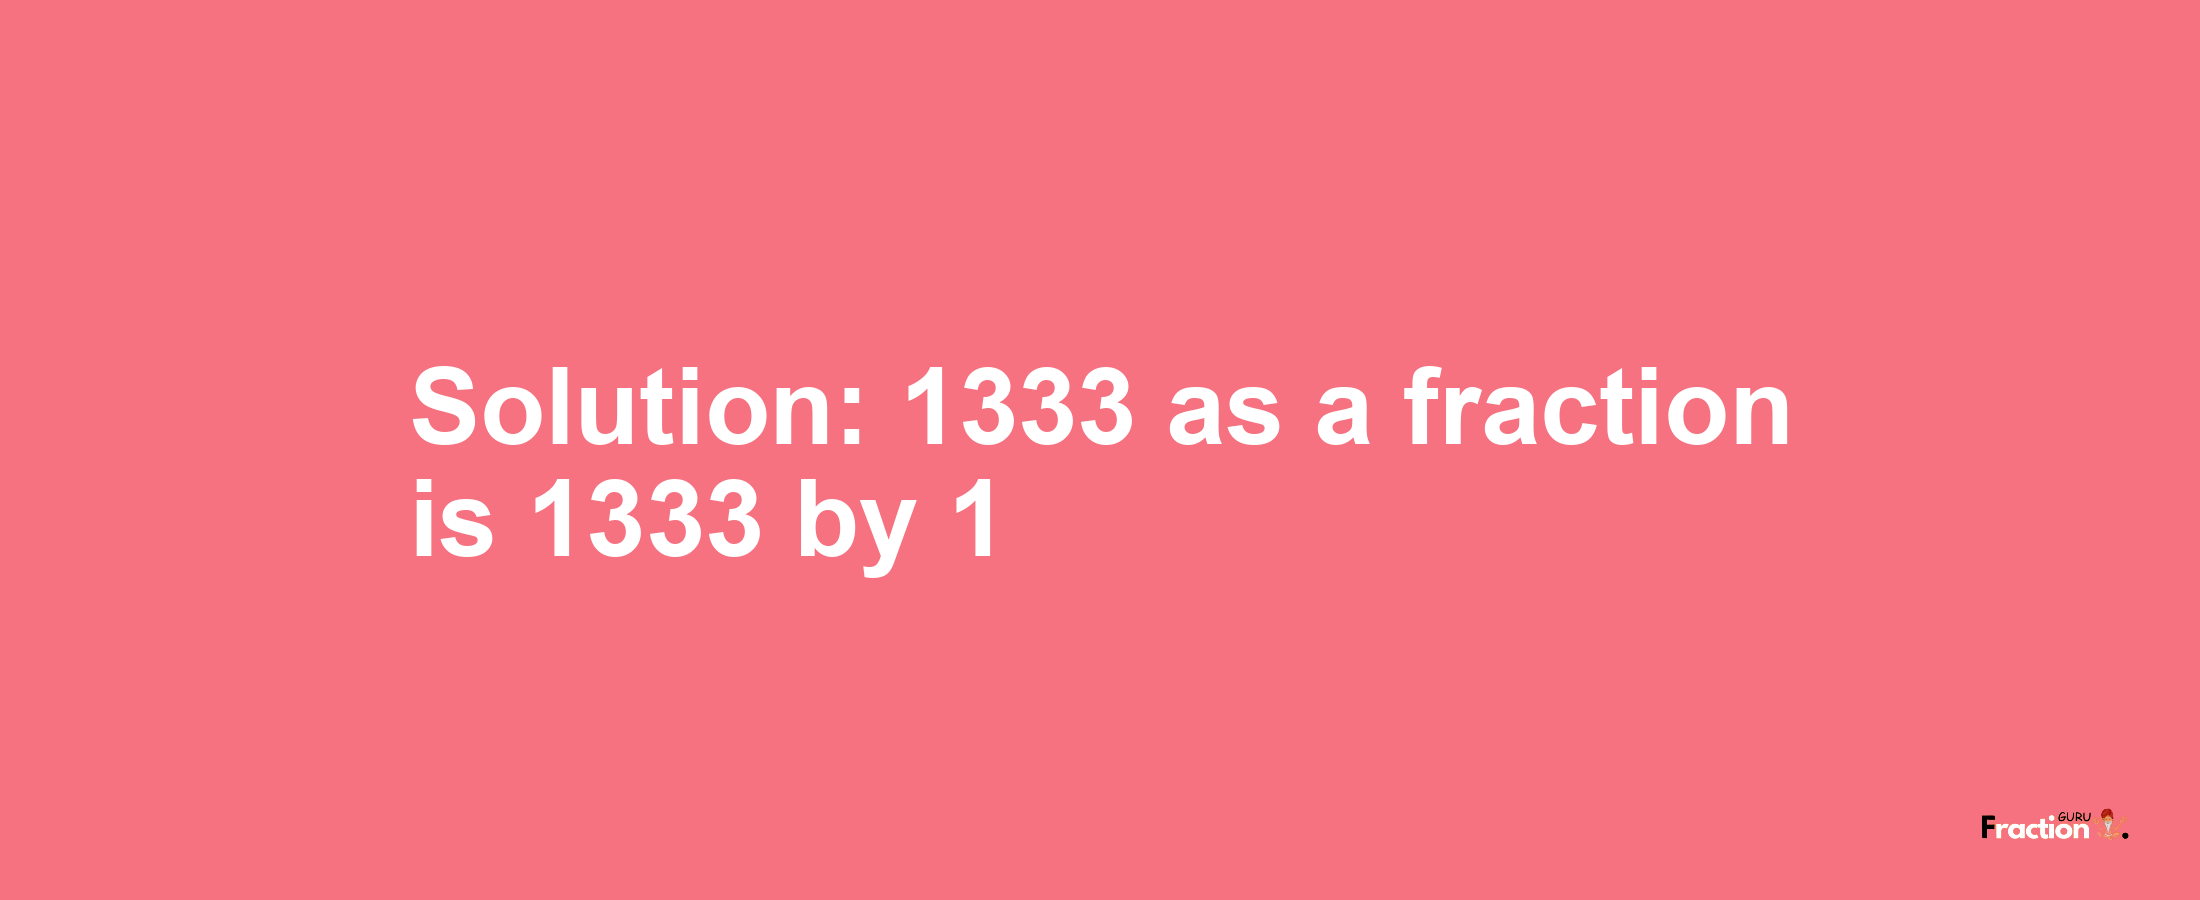 Solution:1333 as a fraction is 1333/1